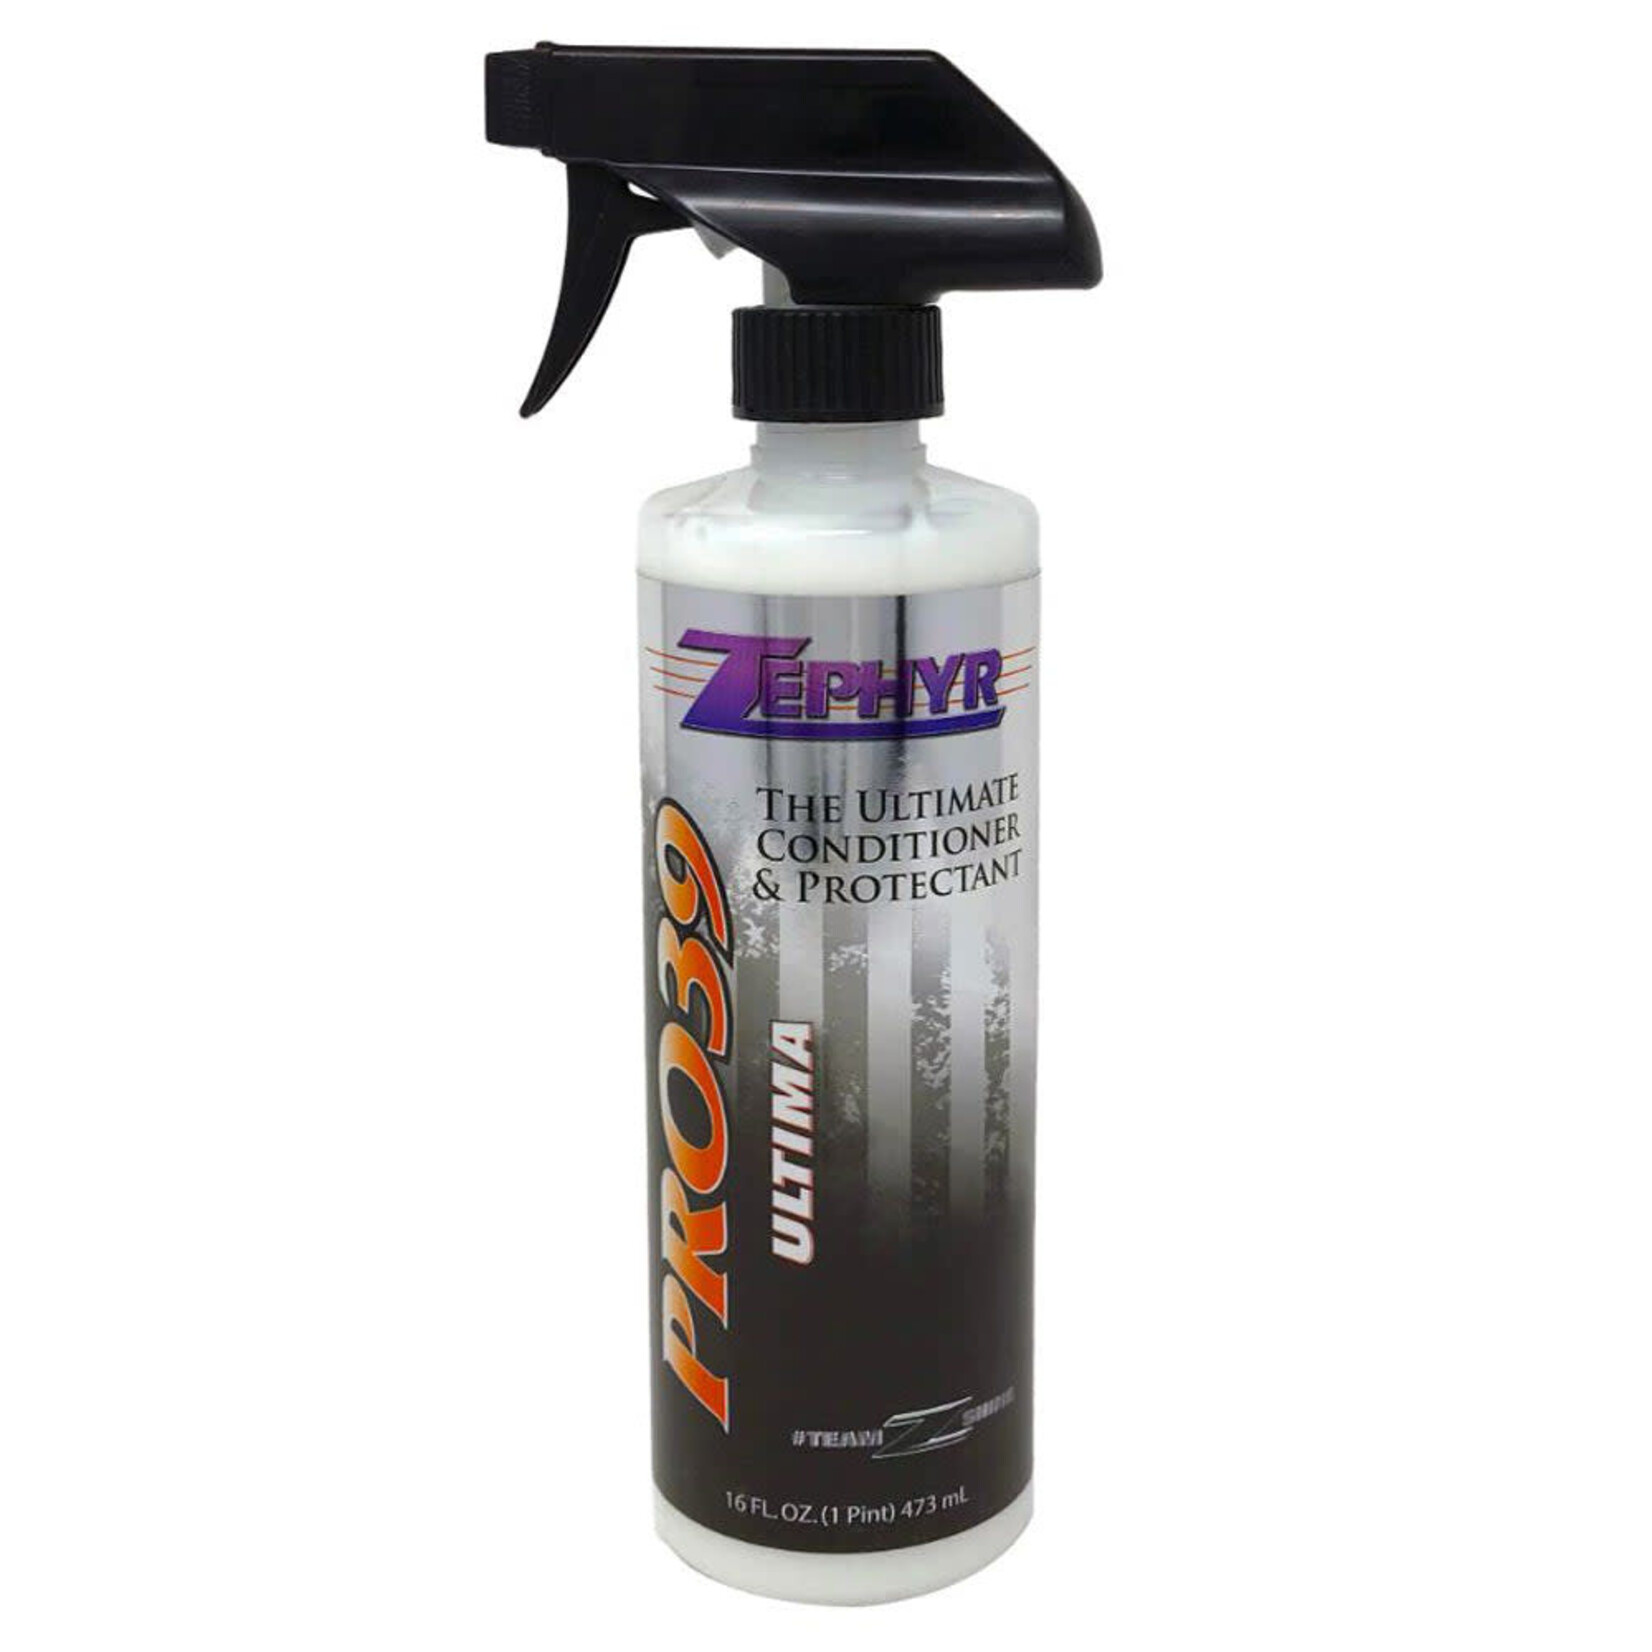 Pro 39 Ultima Conditioner and Protectant Dressing